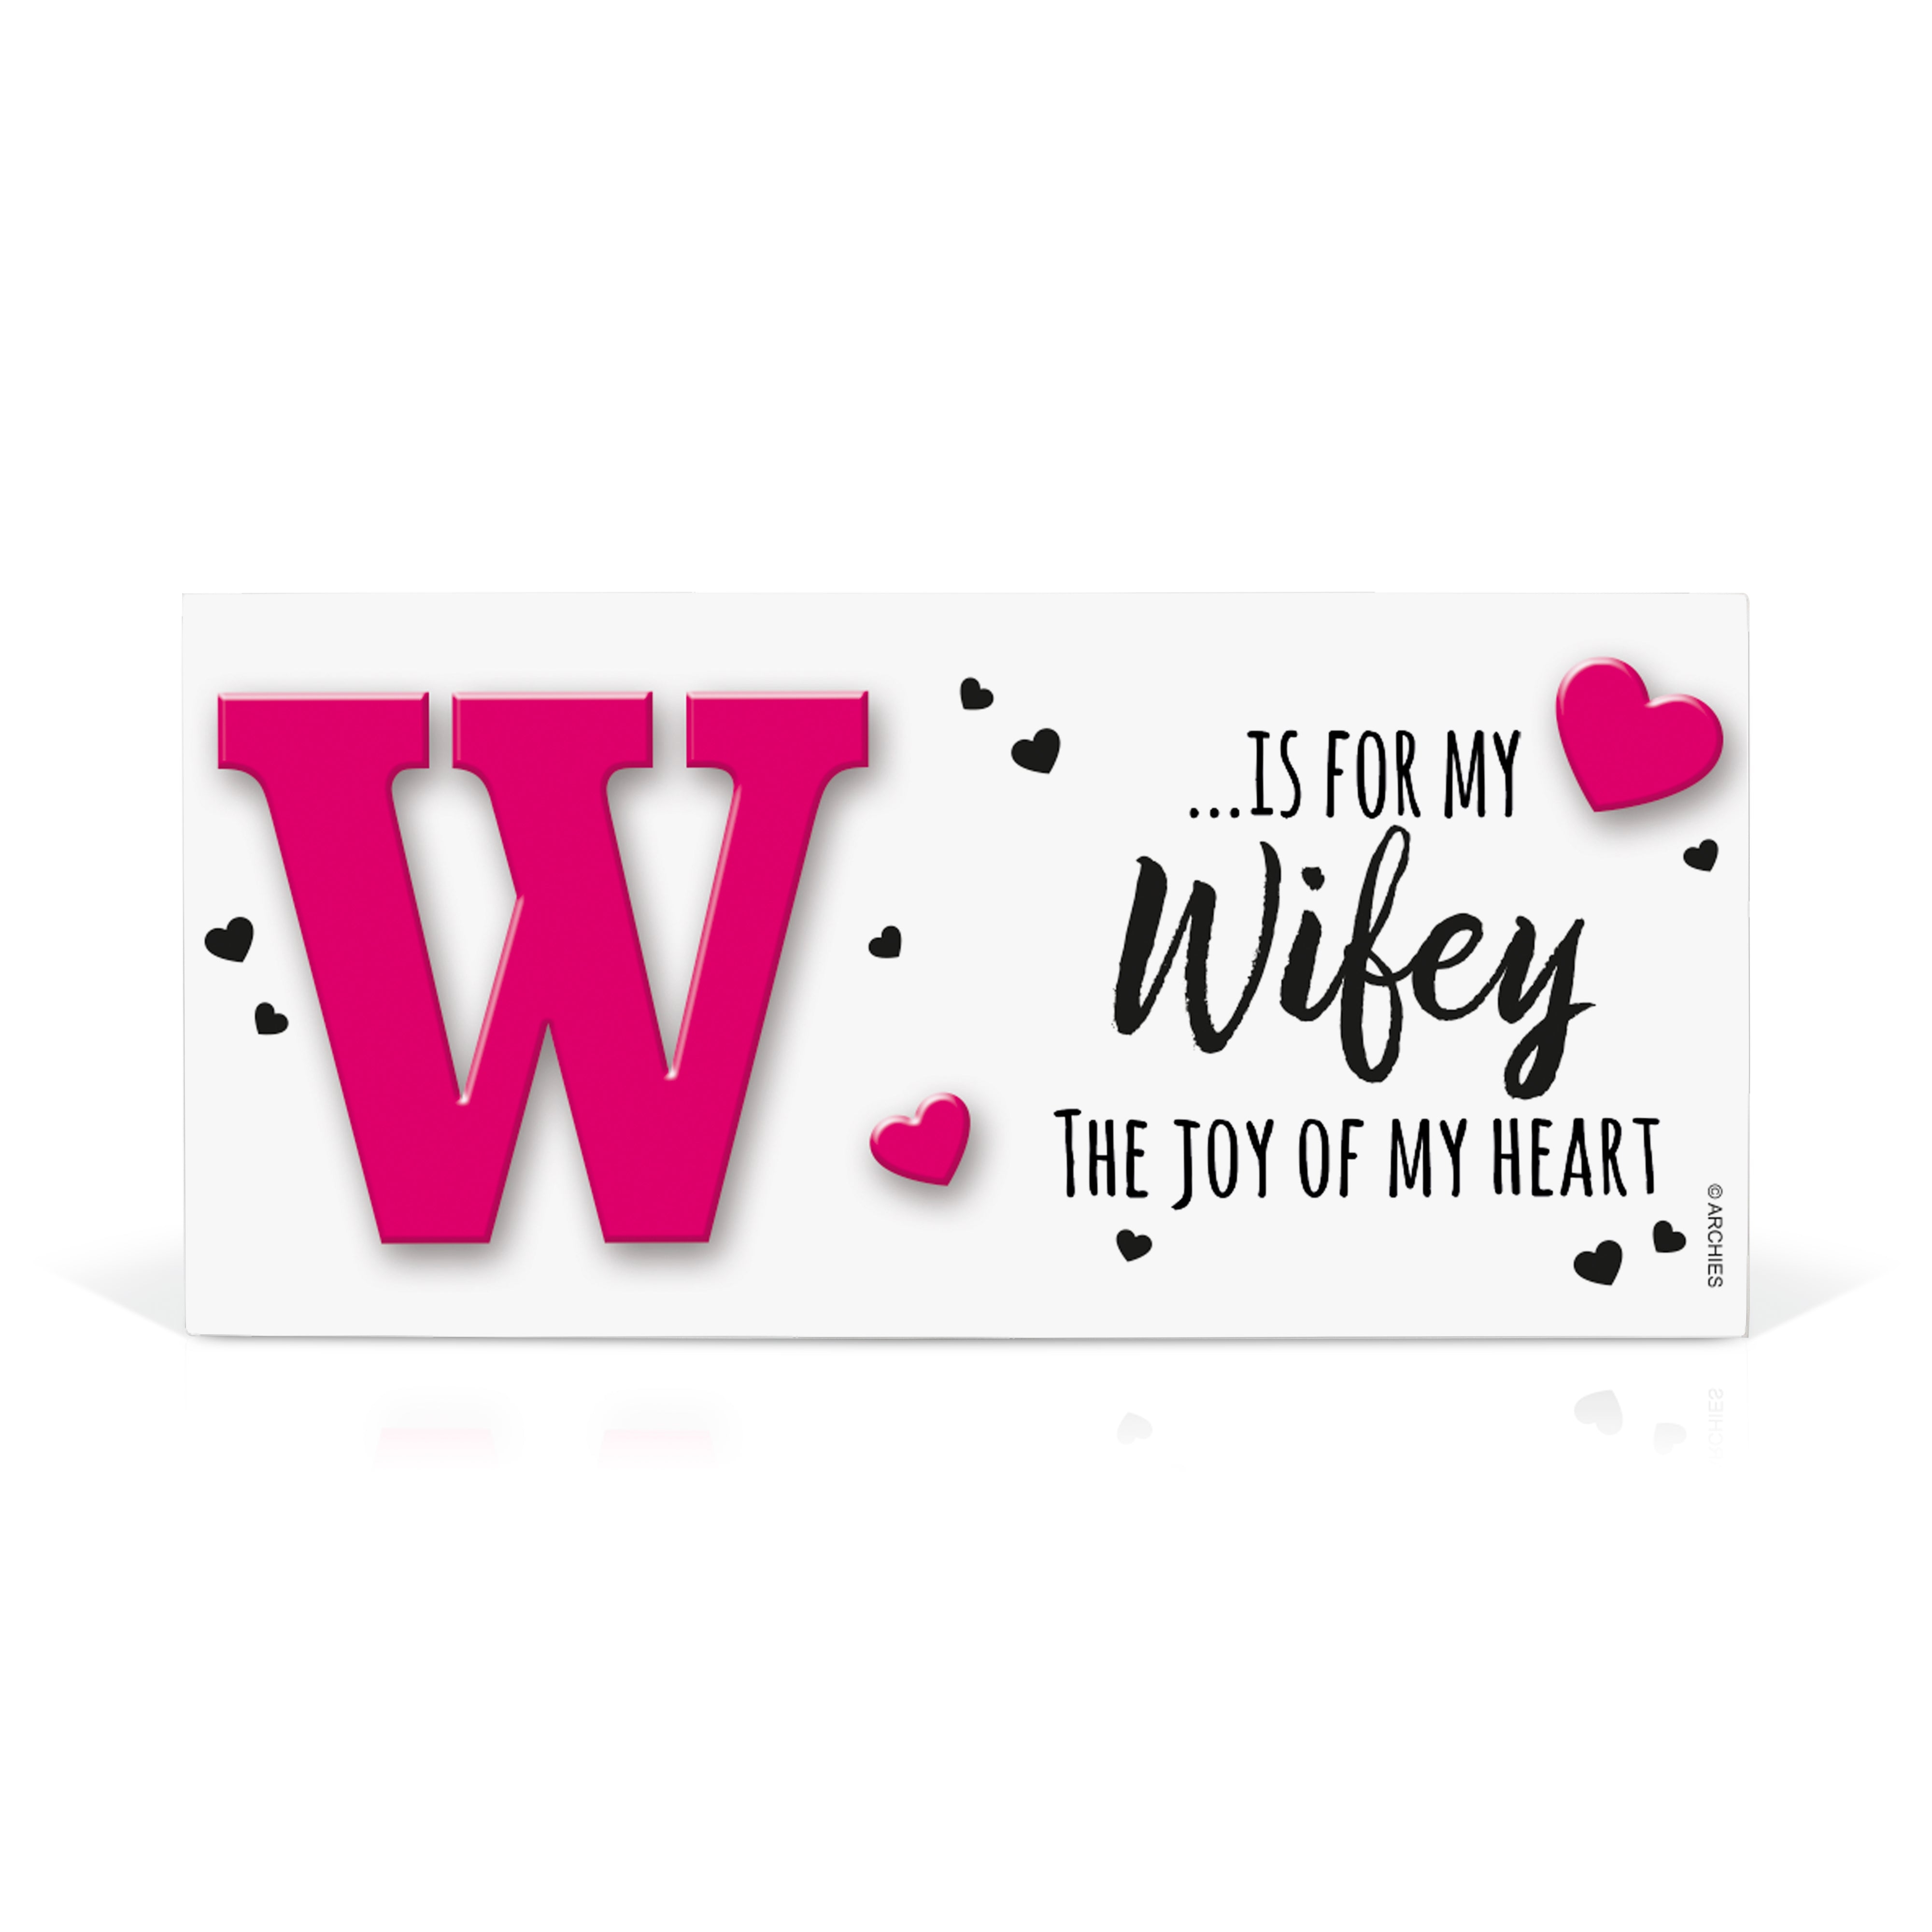 Archies | Archies KEEP SAKE Wife Gift Combo with Ceramic Mug and Elevated Initial Quotation - with a FREE GREETING CARD 5